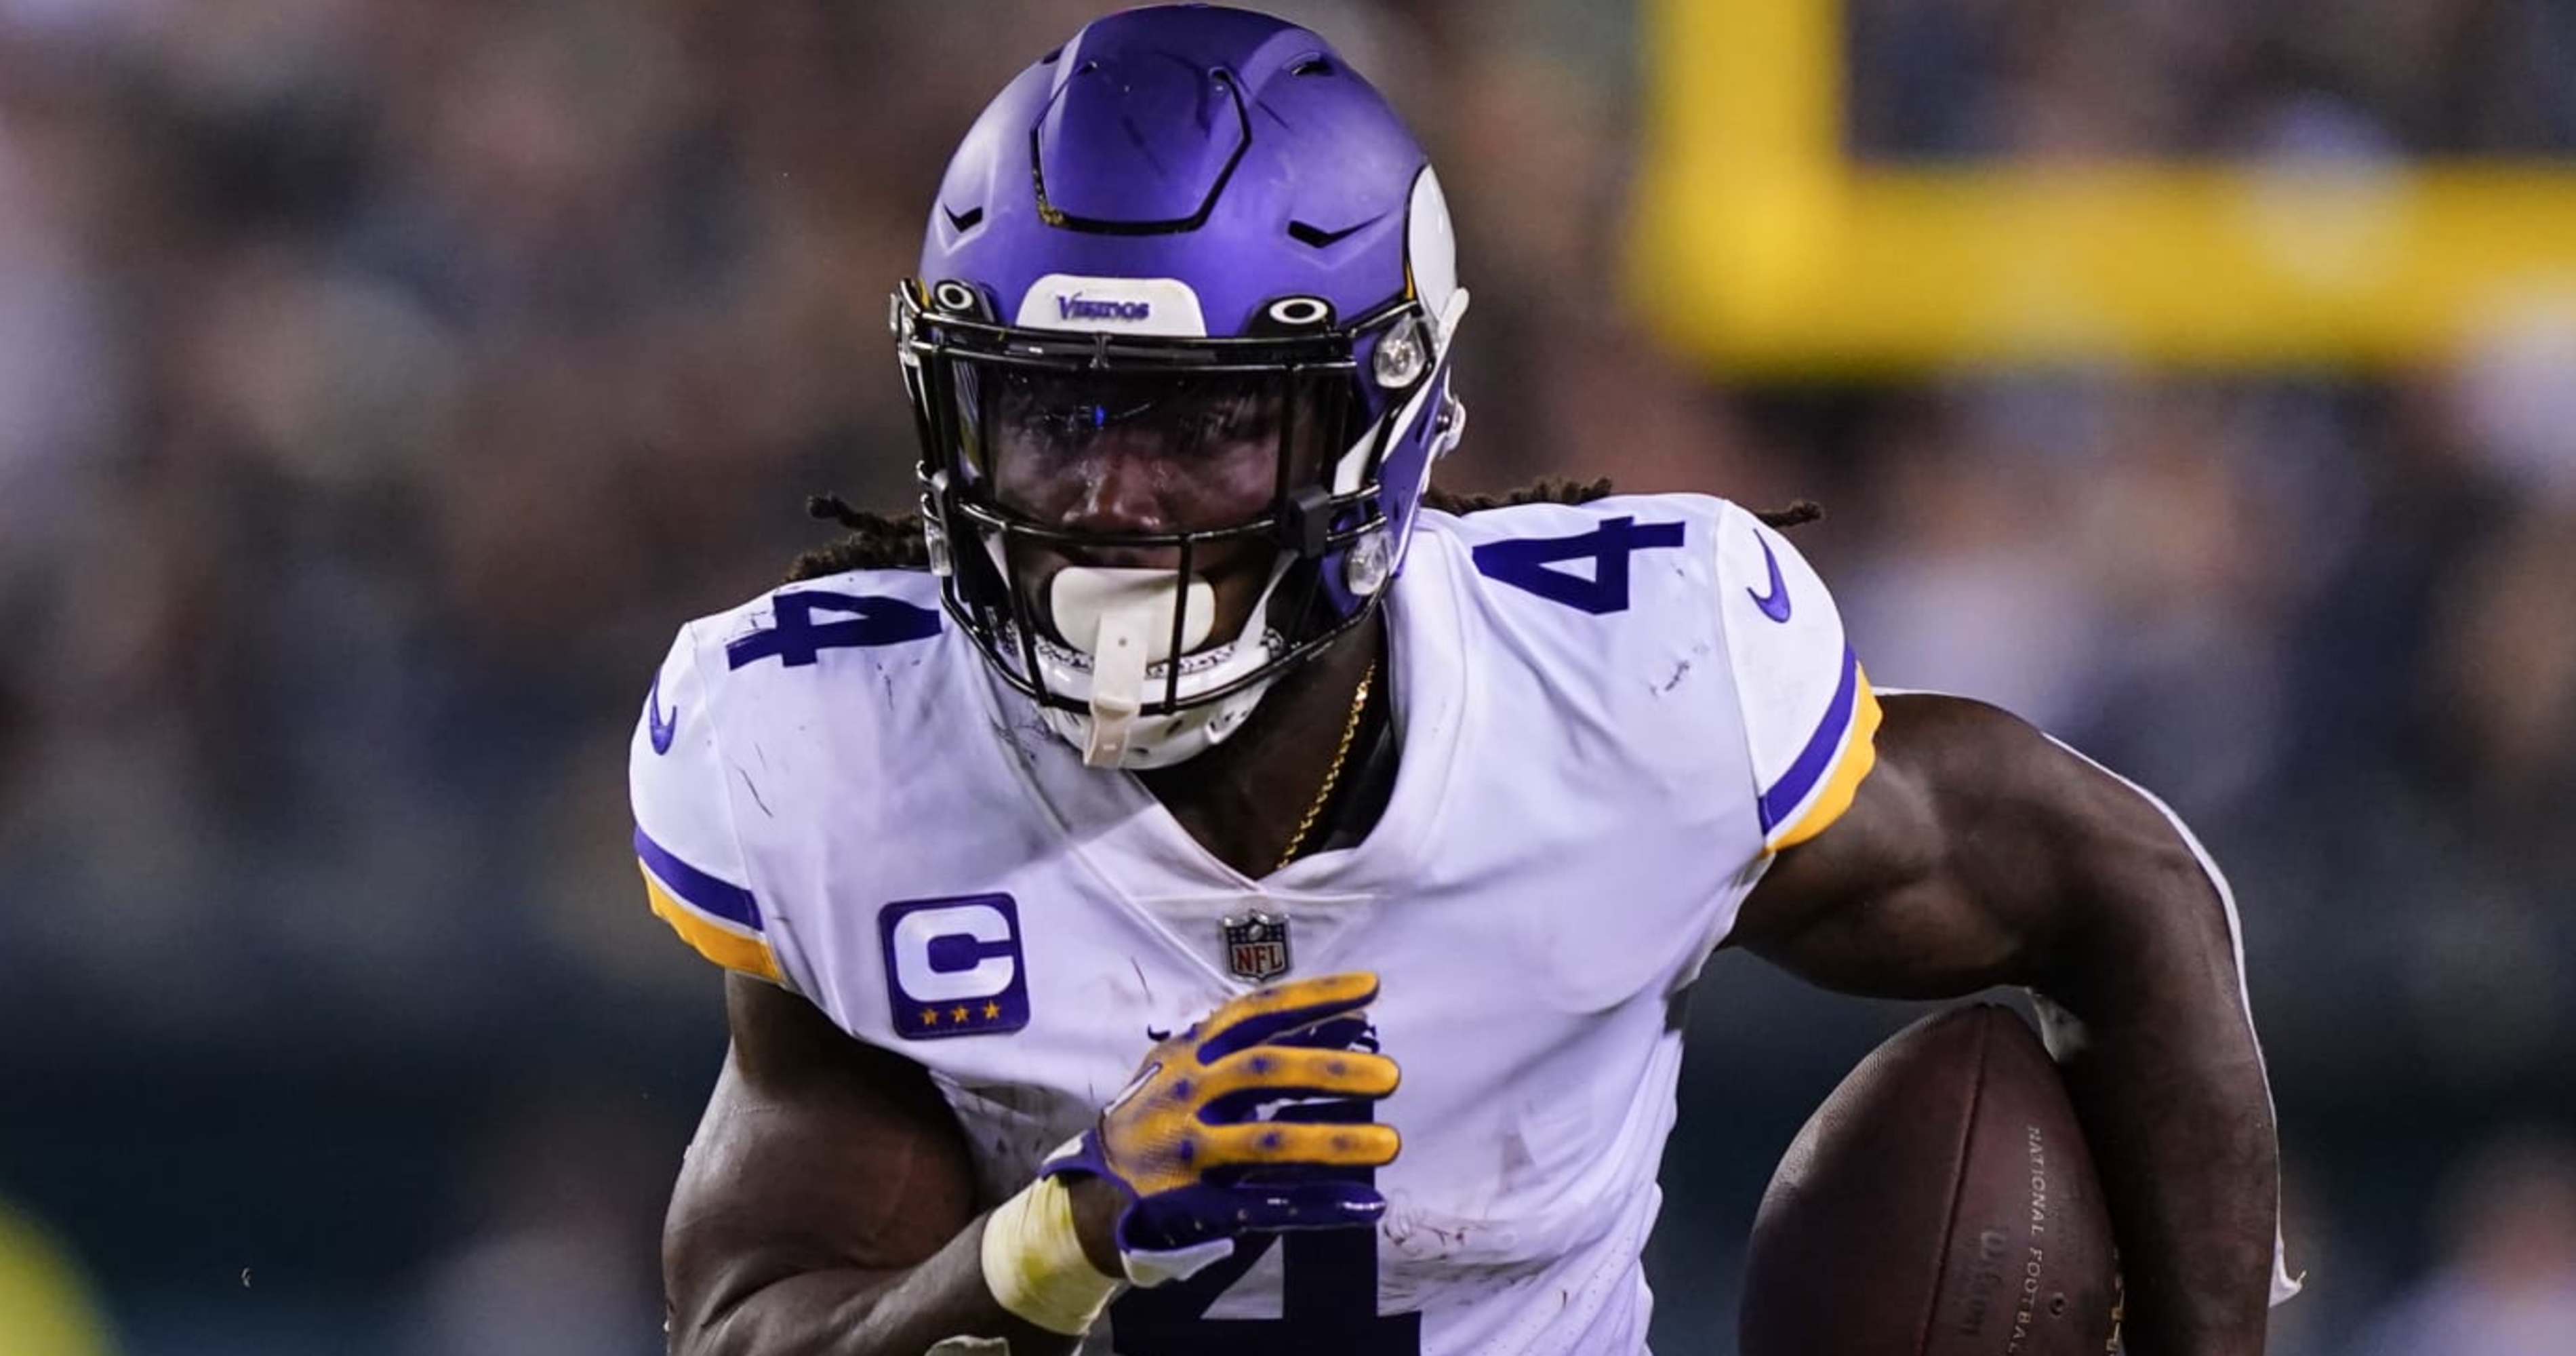 Pro Bowl Rosters Announced: Dalvin Cook & Justin Jefferson Only Vikings 